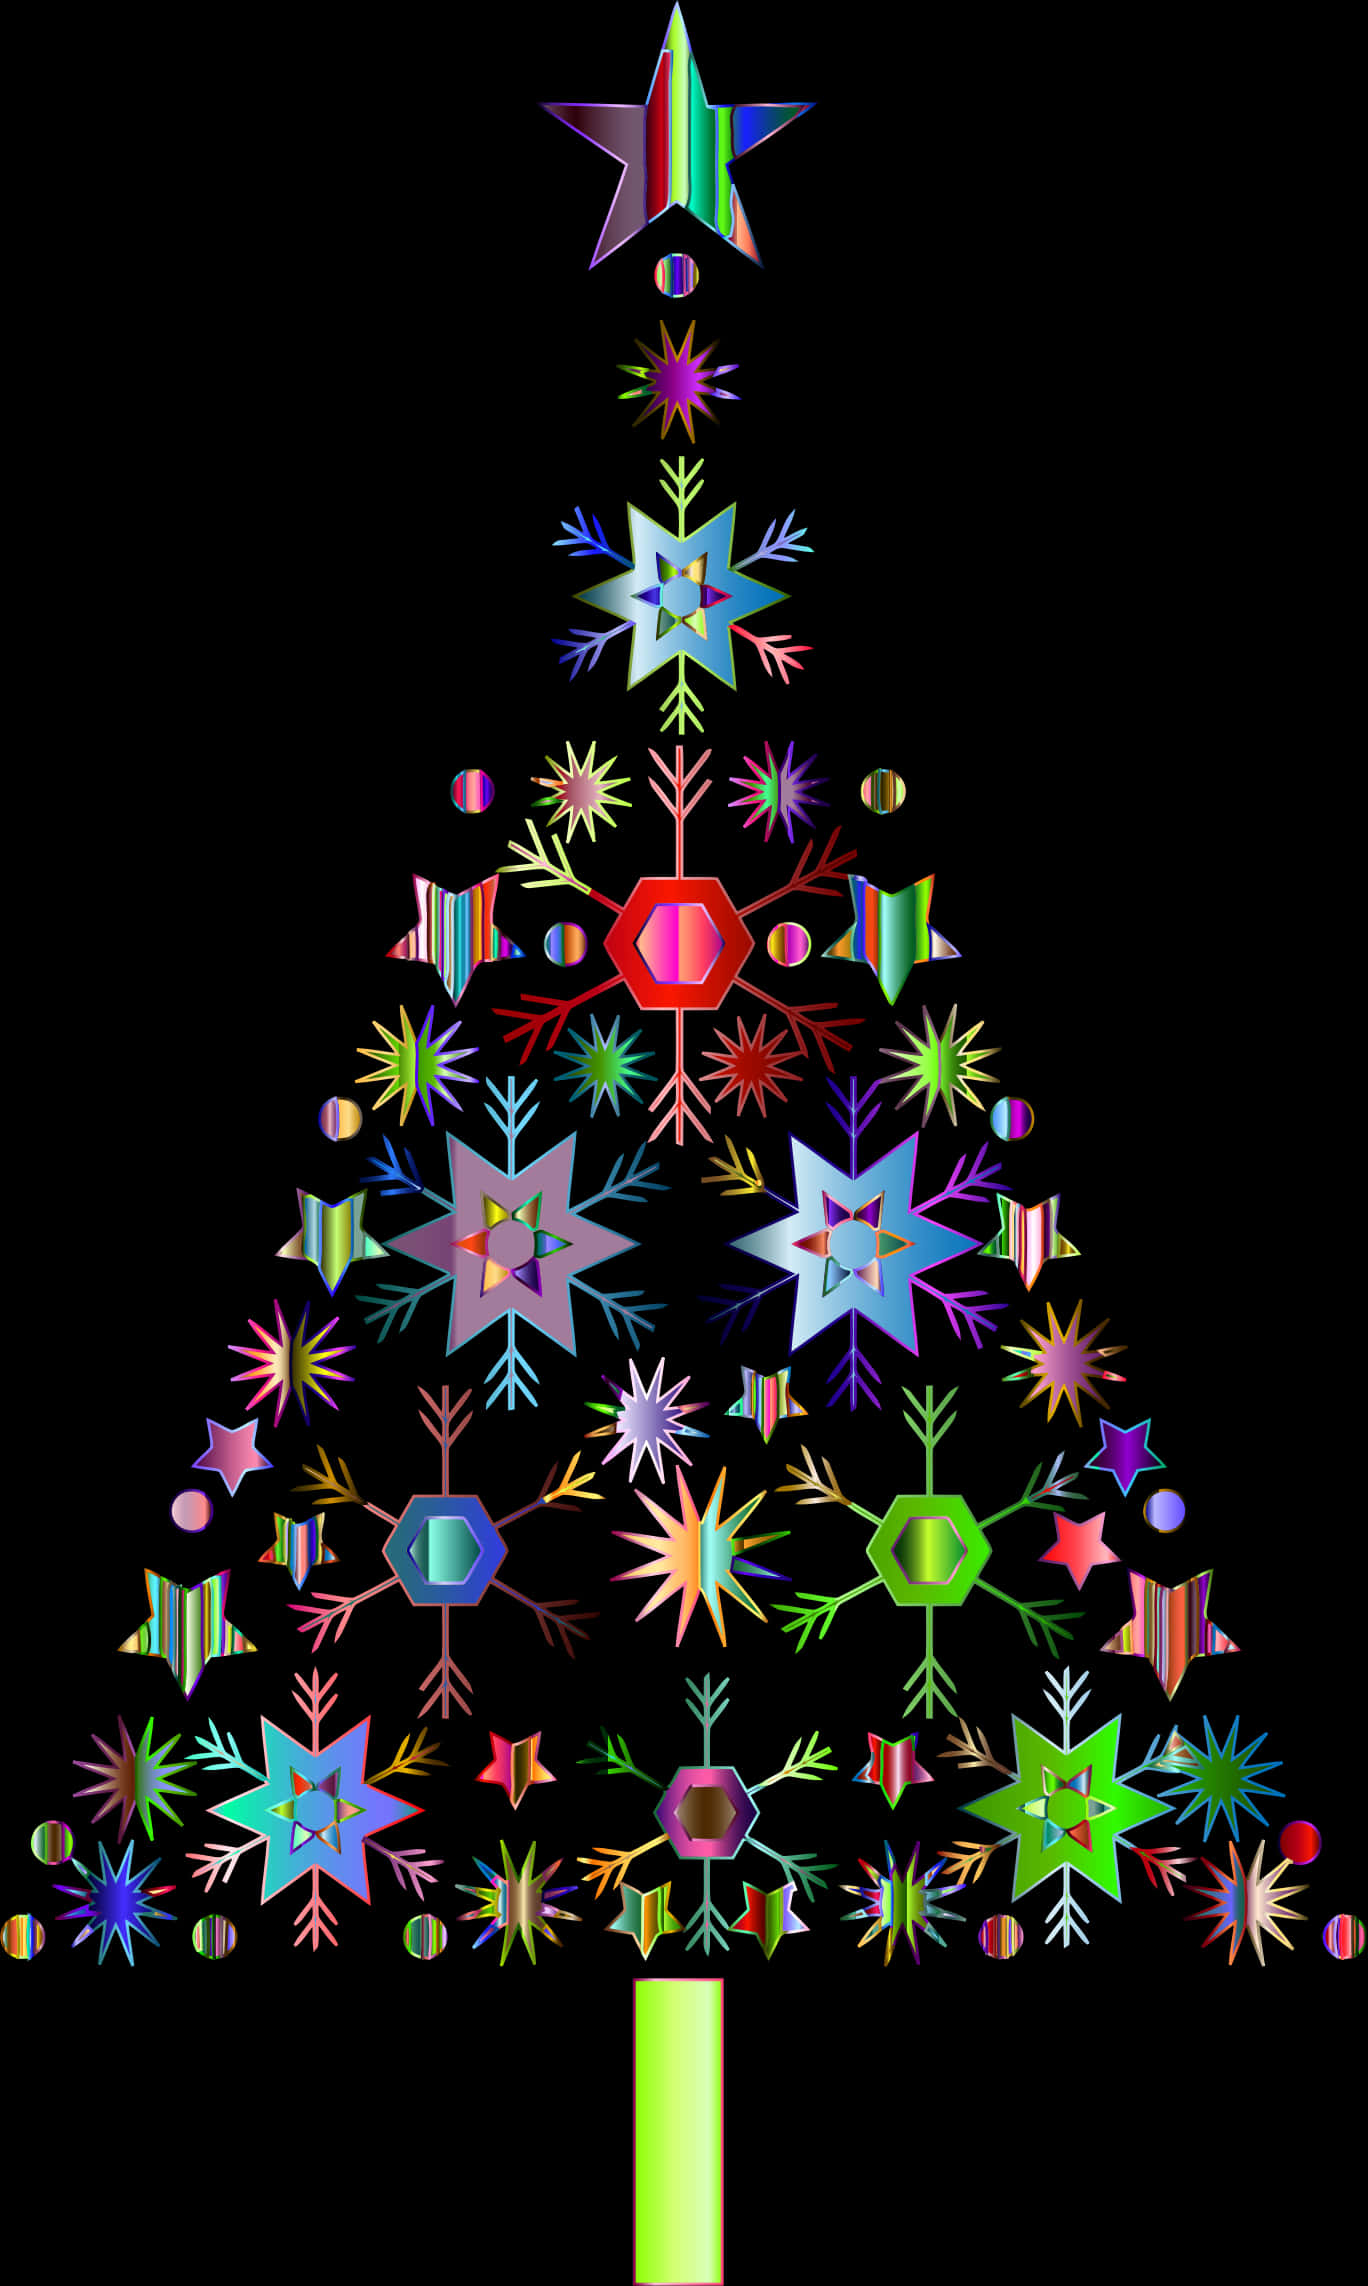 A Christmas Tree Made Of Colorful Snowflakes